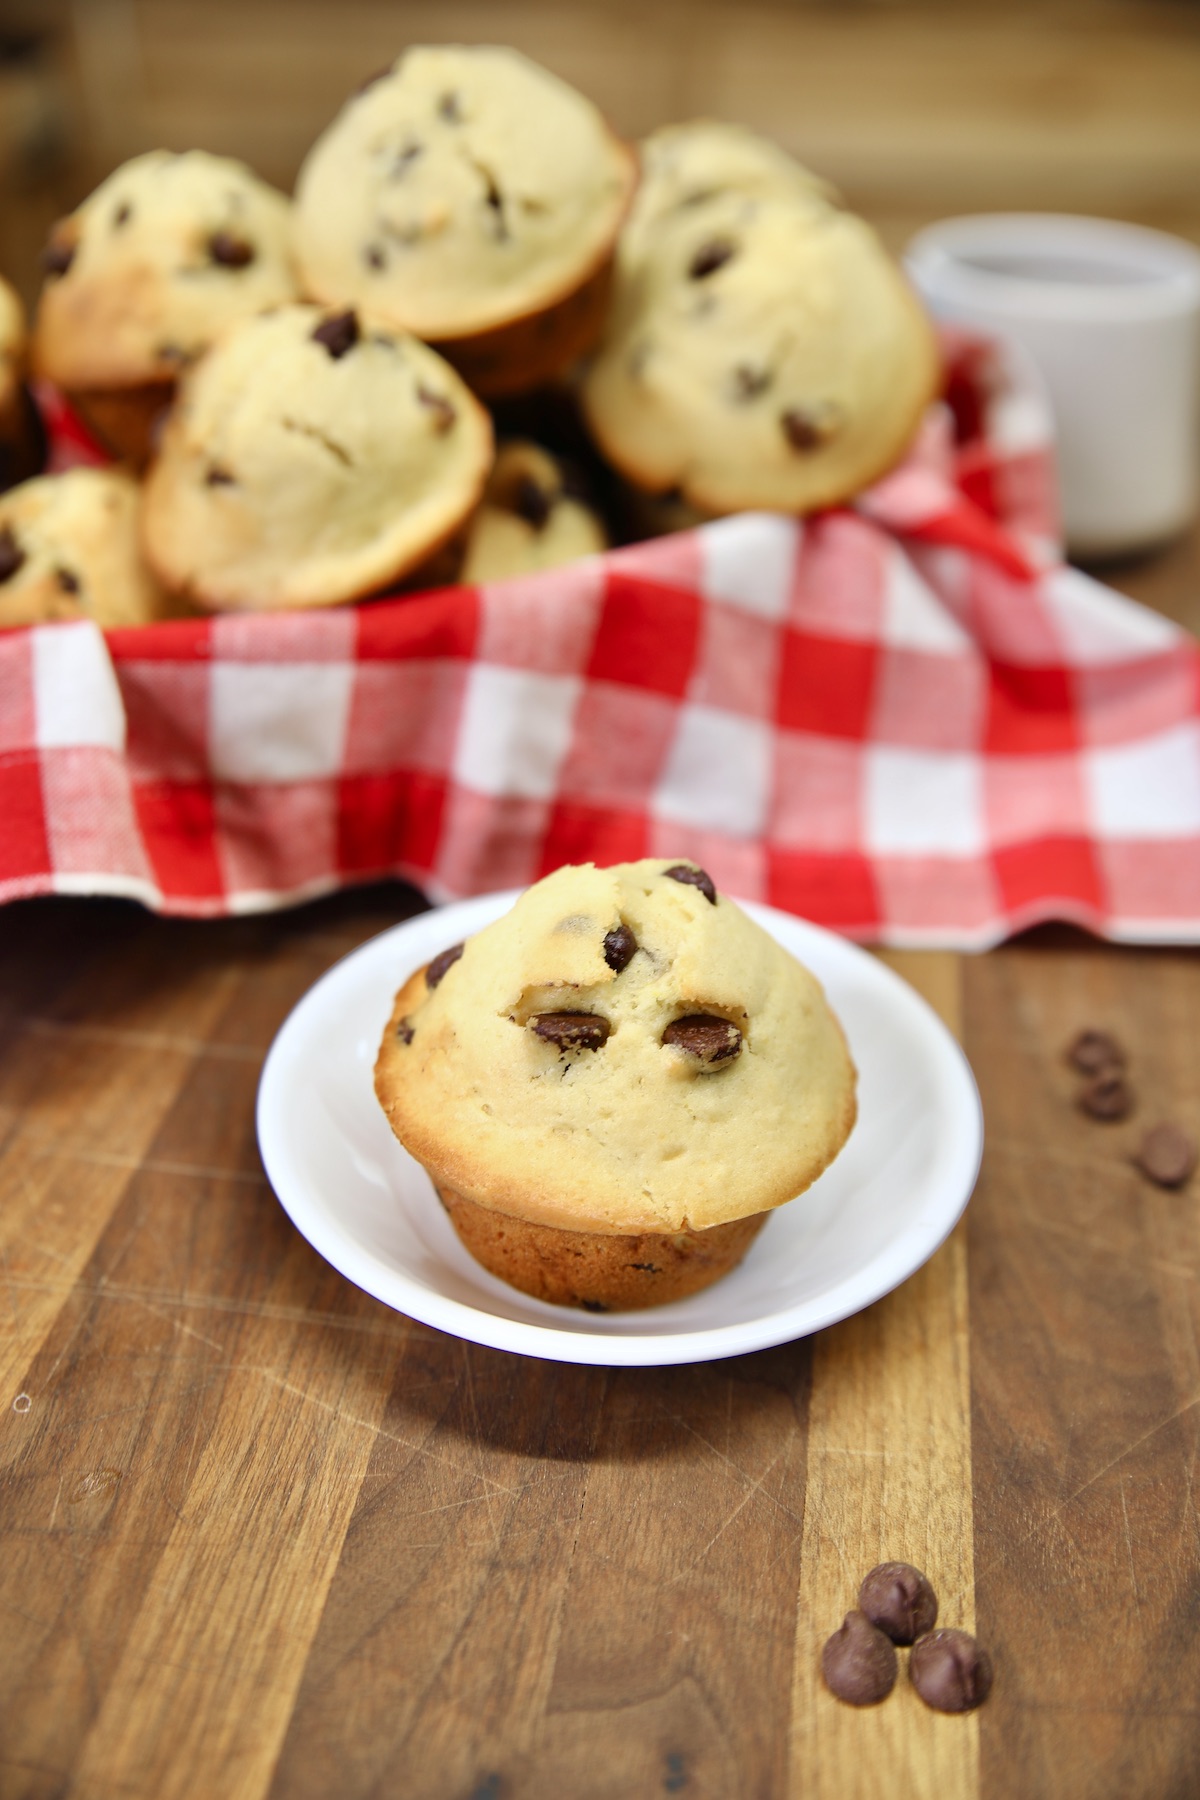 Chocolate chip muffins in a basket and one on a small plate.